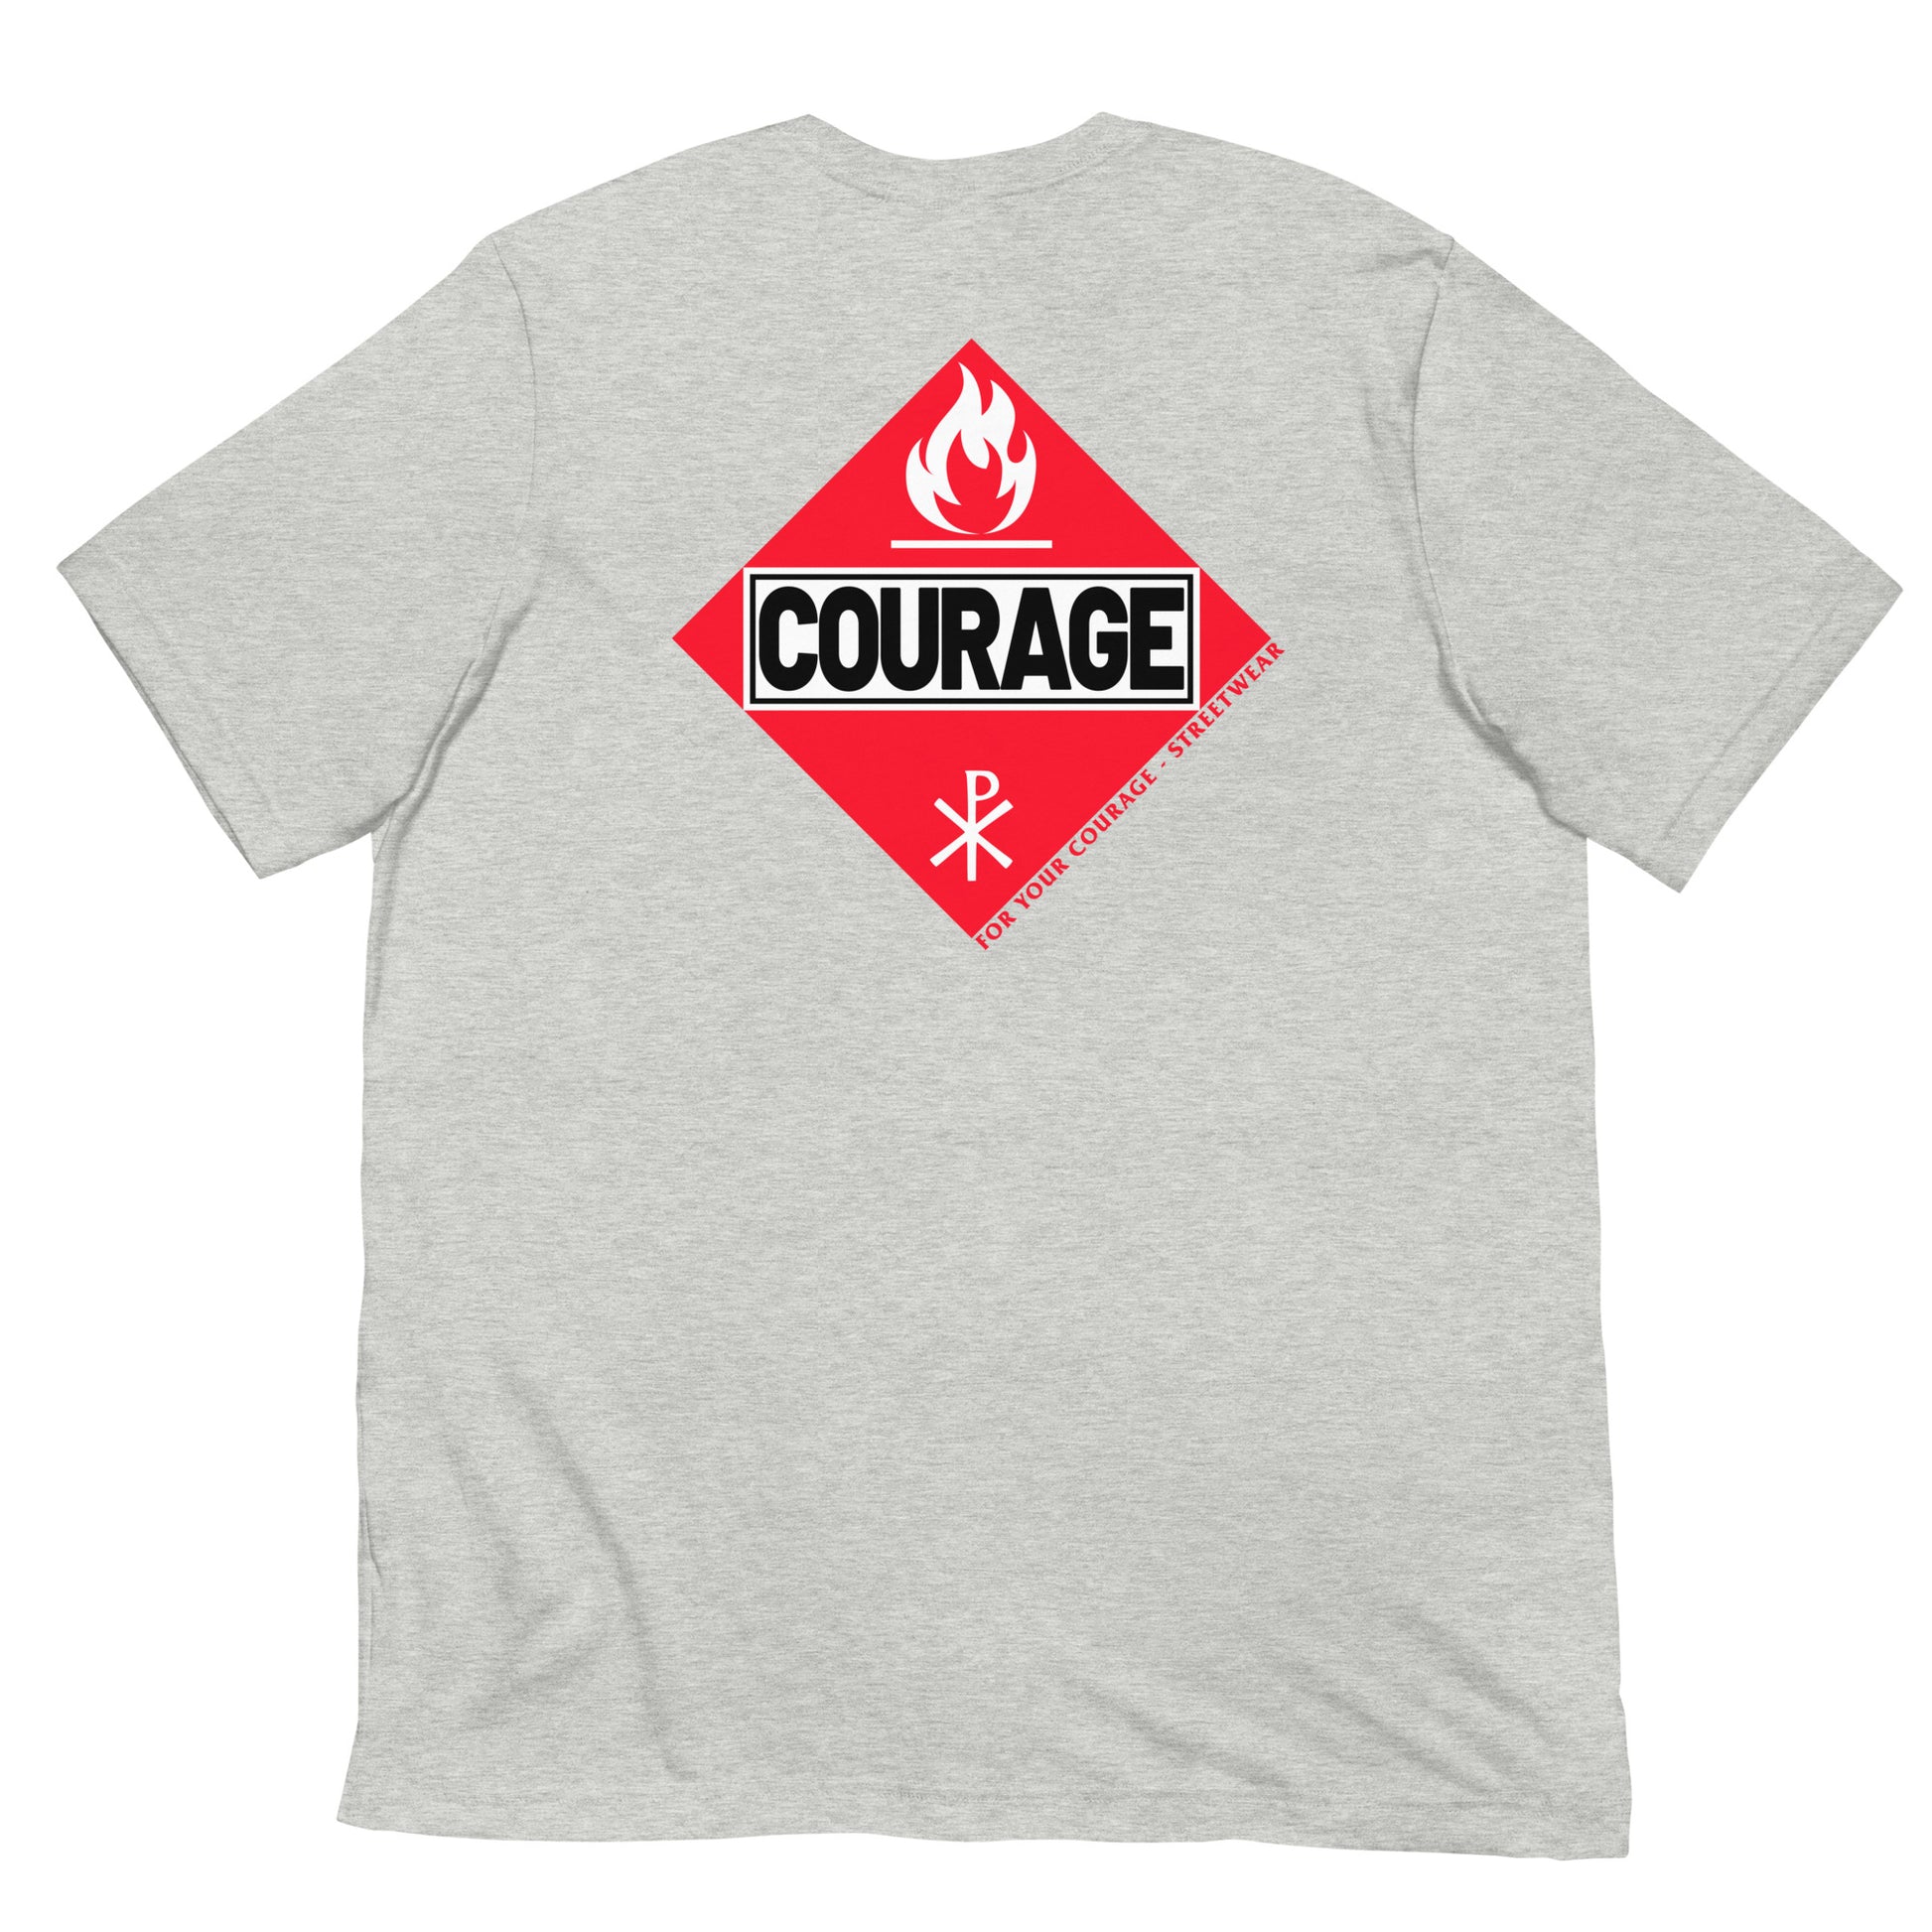 Courage Under Fire - For Your Courage